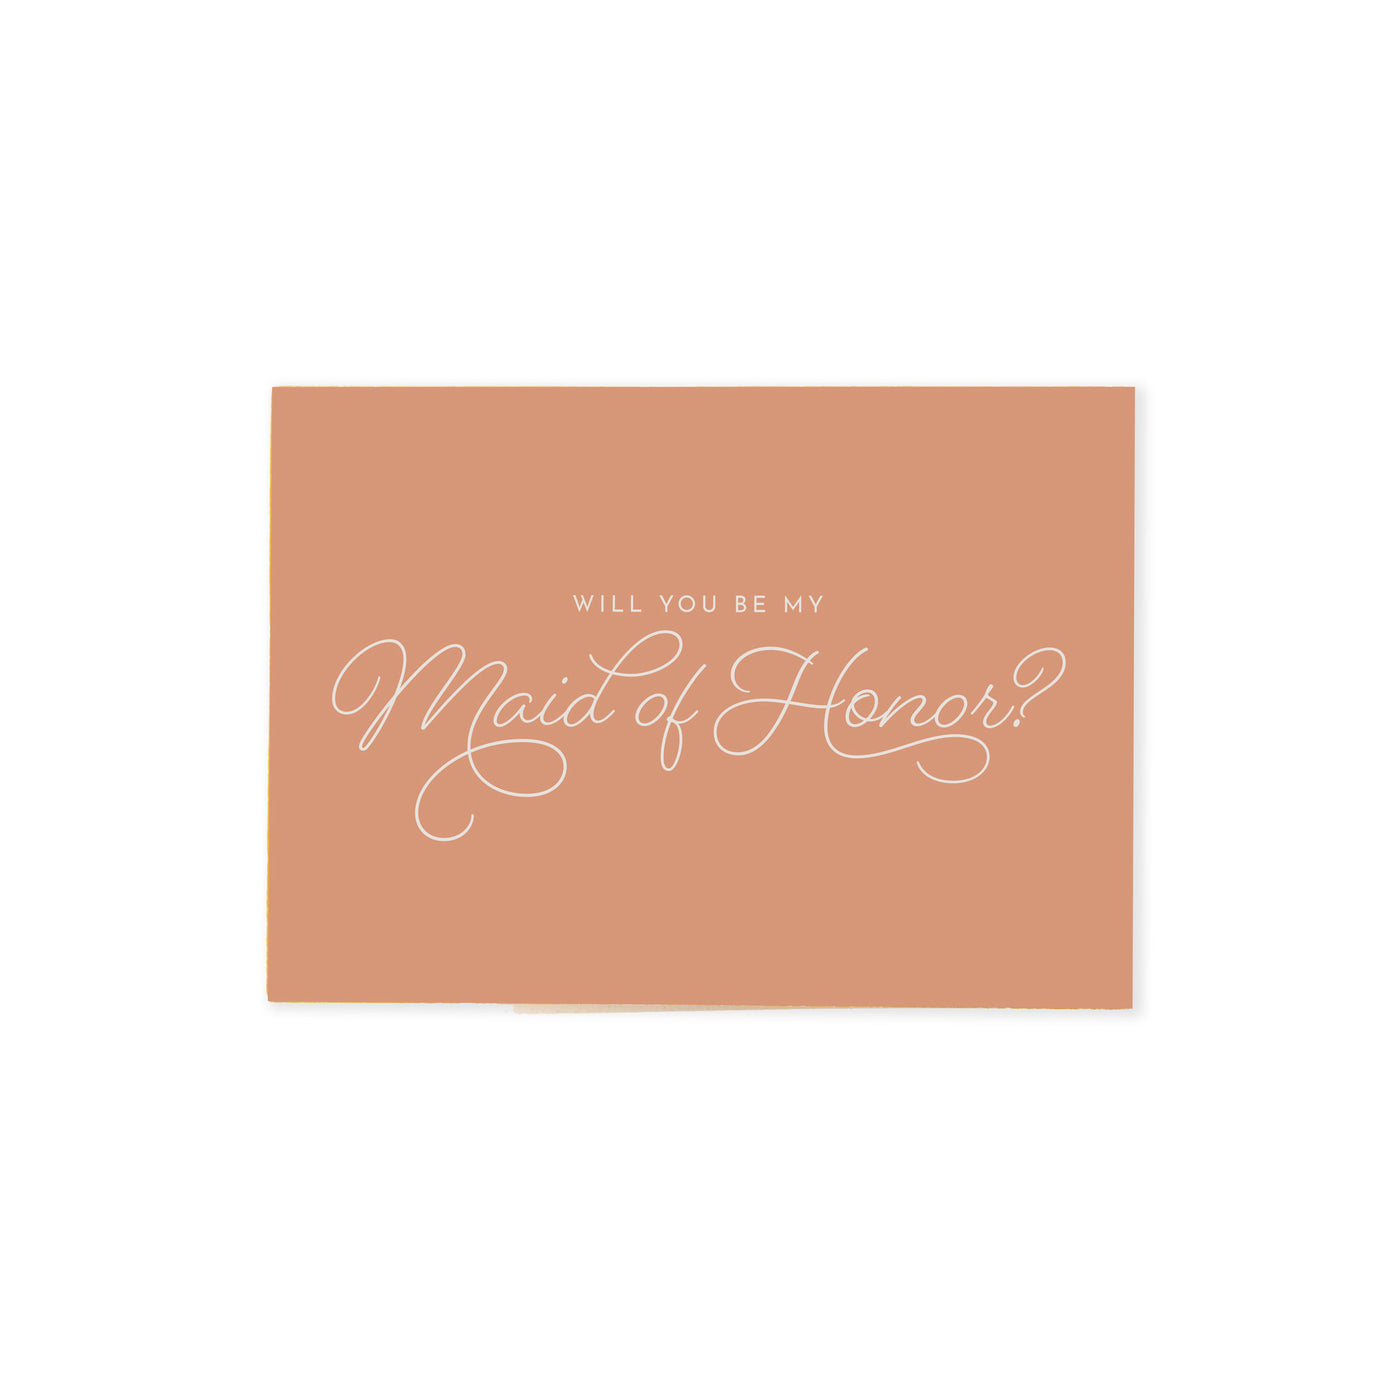 peach colored Be my maid of honor proposal card that reads "will you be my maid of honor?" in white cursive font